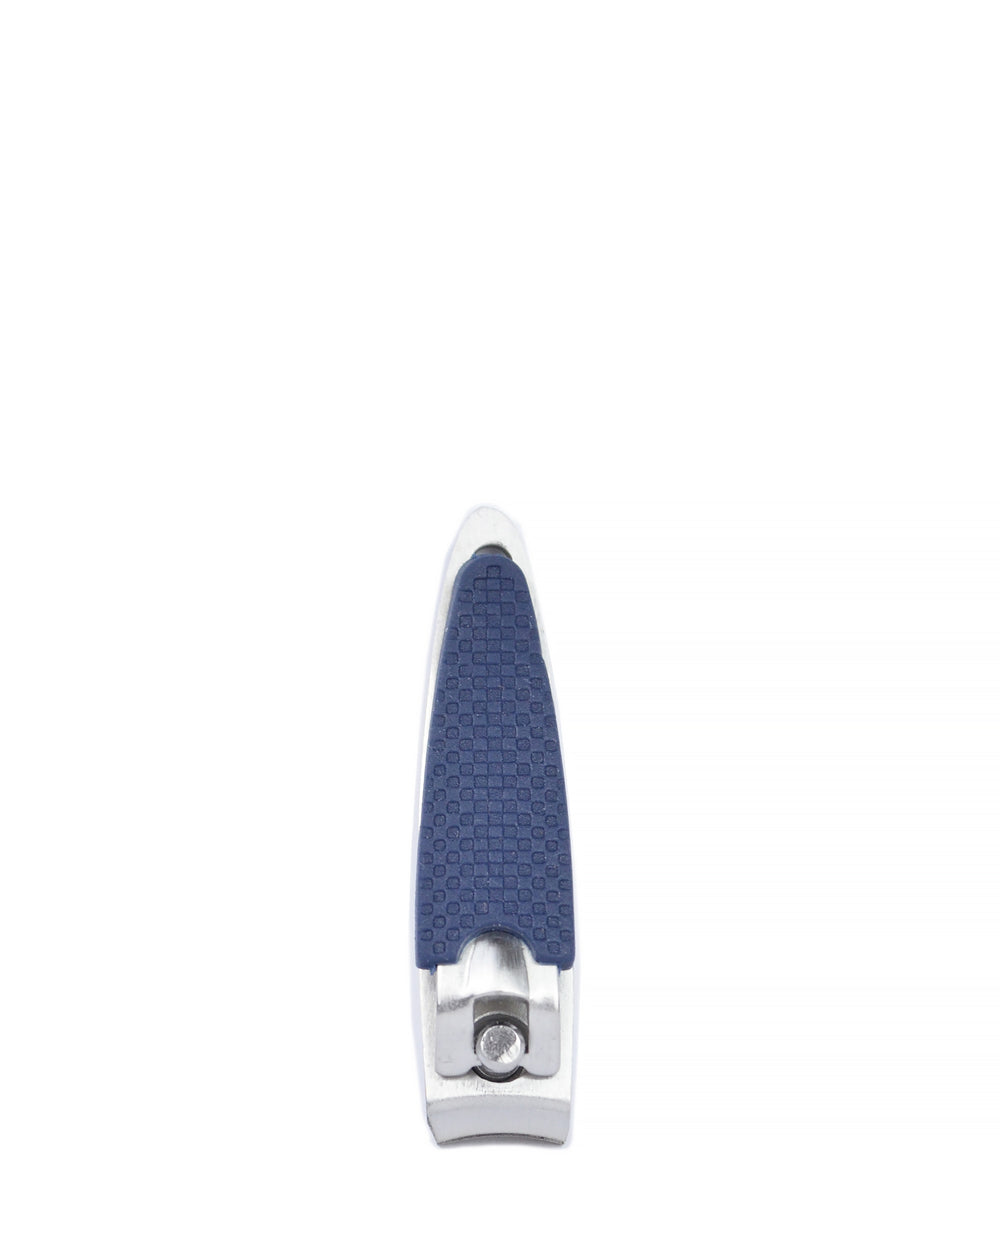 Stainless Large Nail Clipper and Toe Clipper